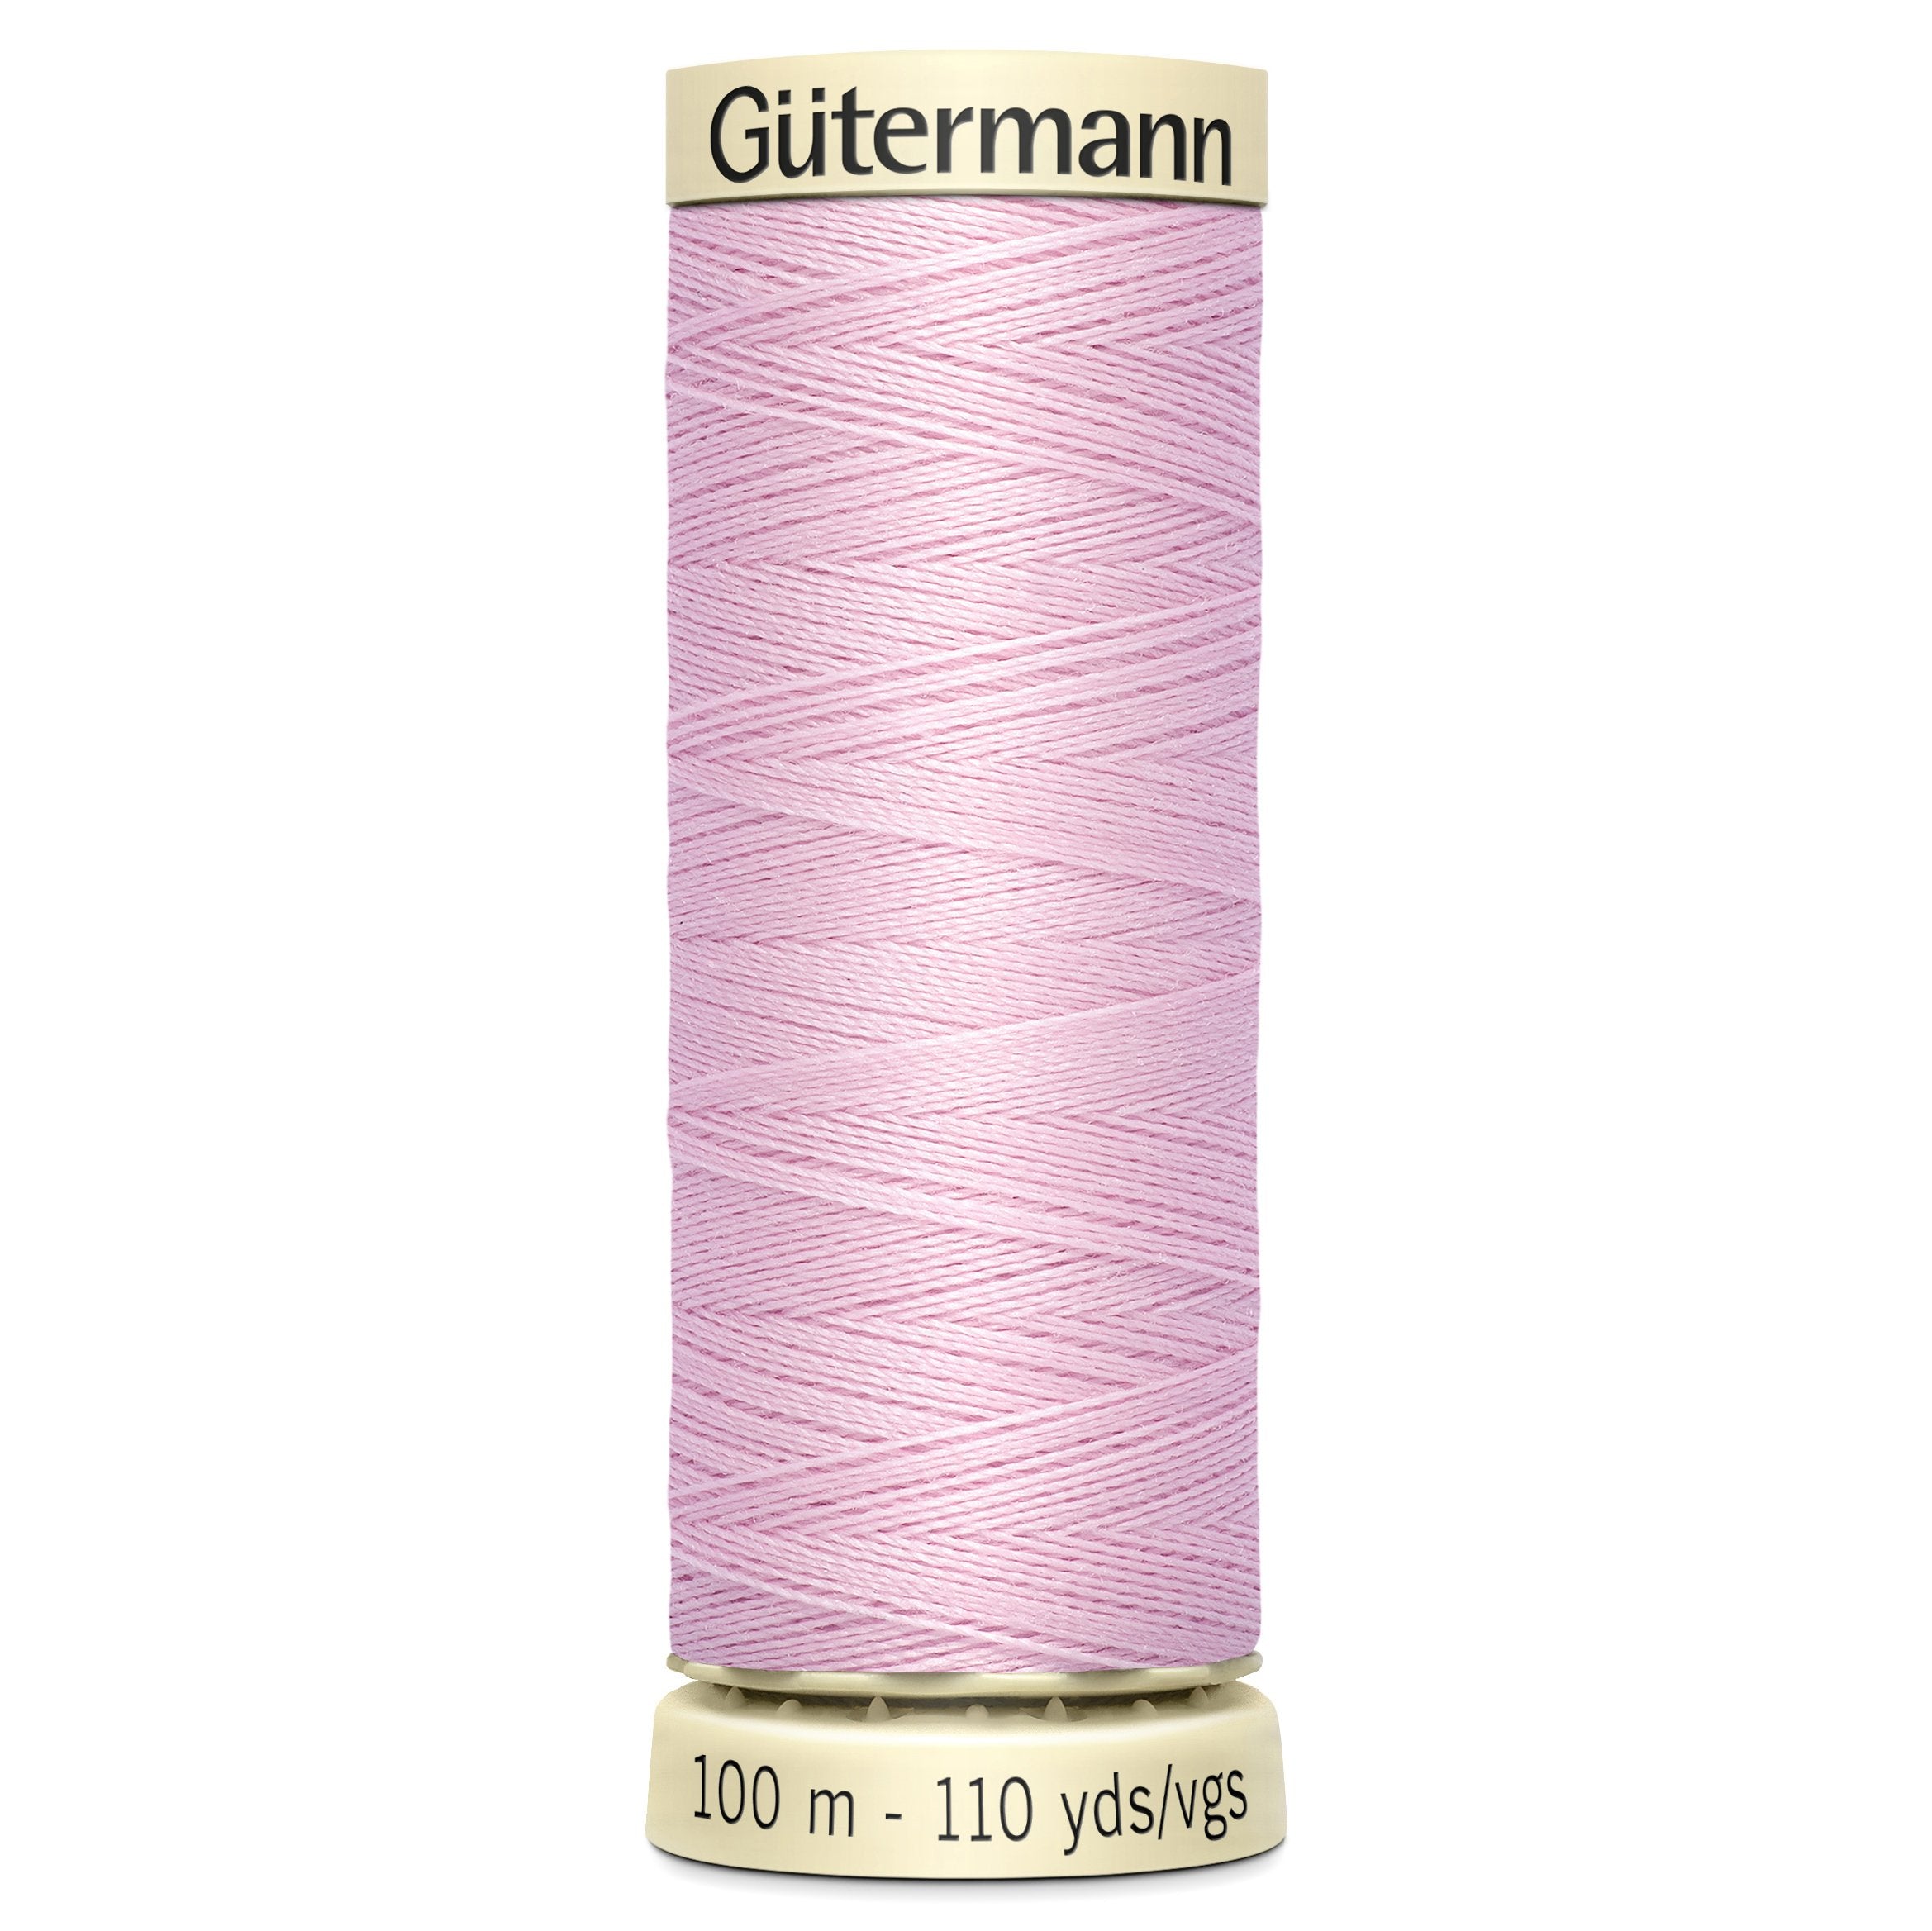 Gutermann Sew All Thread colour 320 Pink from Jaycotts Sewing Supplies